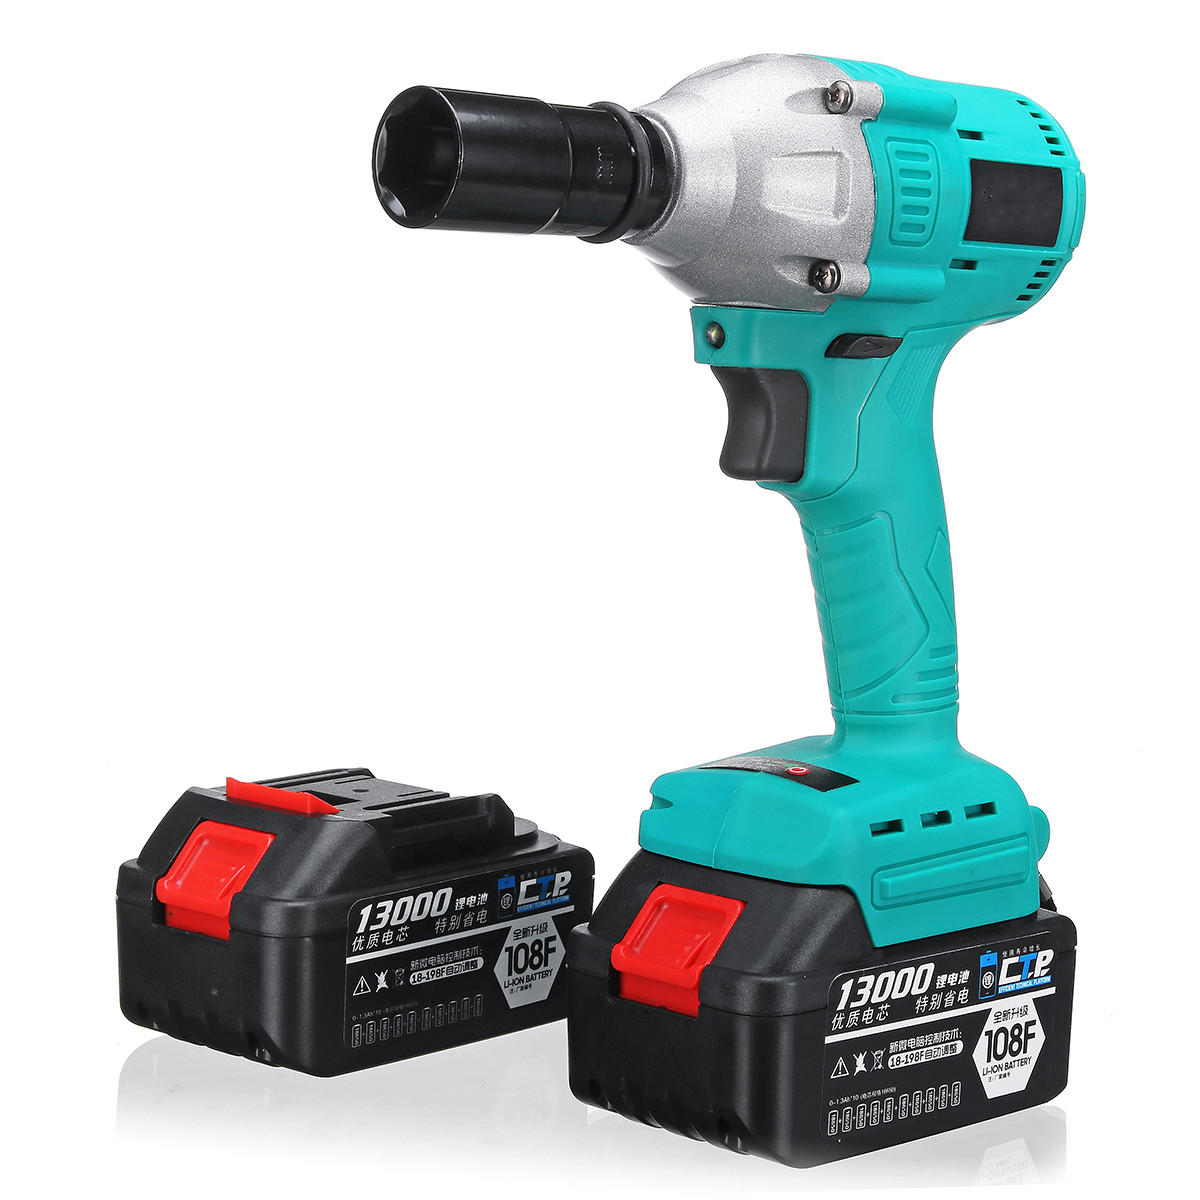 100 240V Li ion Electric Wrench Brushless Impact Wrench Wood Work Power Tool with 2 Battery